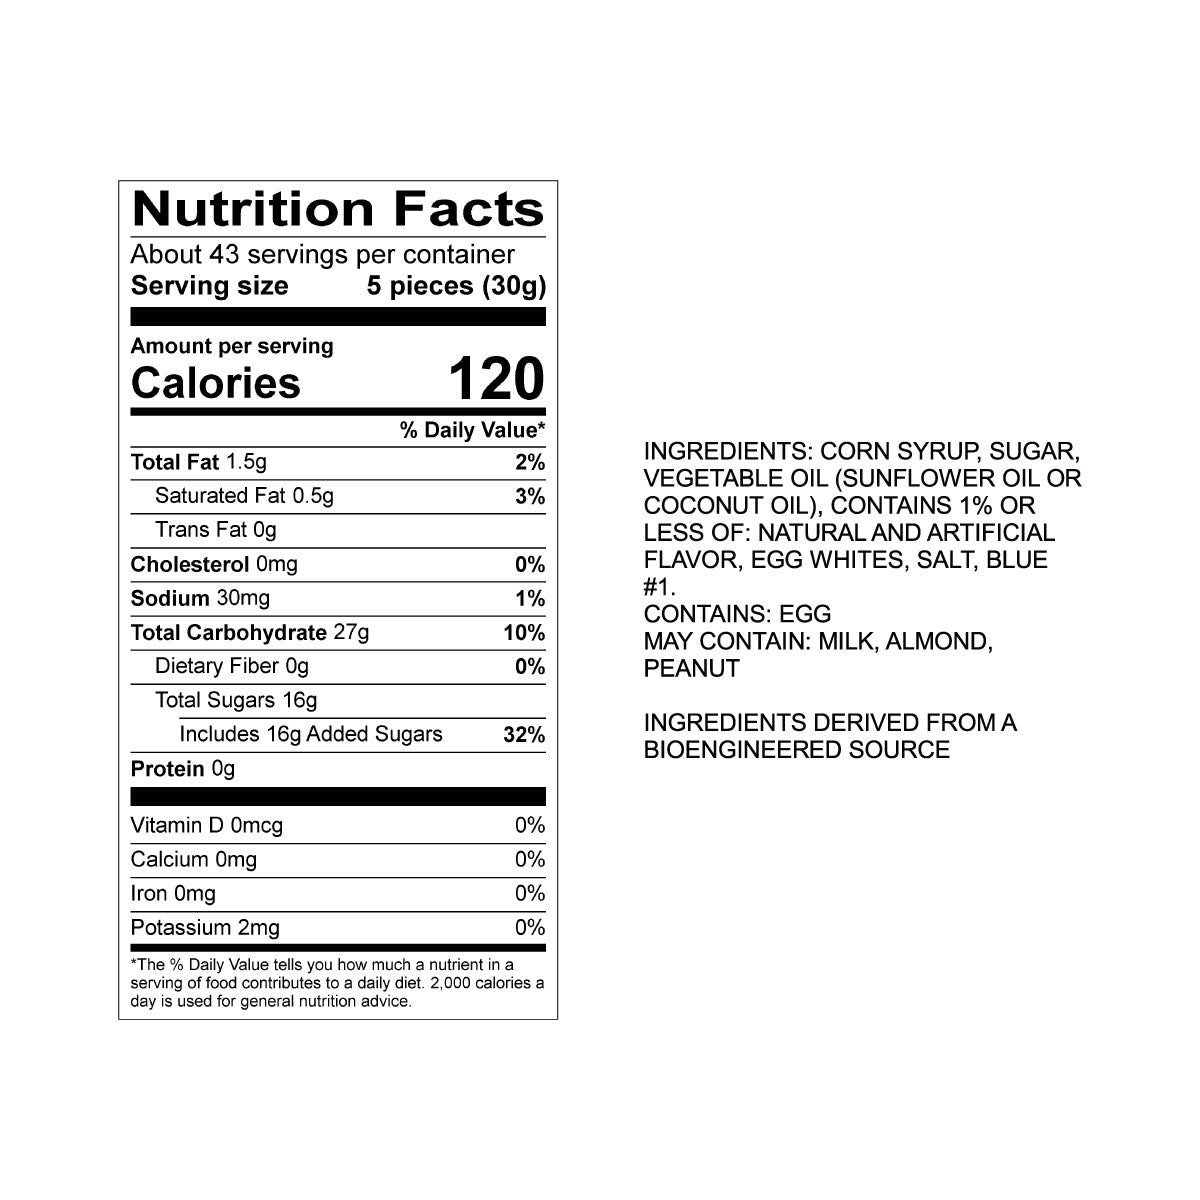 Sweet's Cotton Candy Taffy Nutrition Fact Panel & Ingredients for the NET WT 2.82LB (1.28kg) Bulk Bag